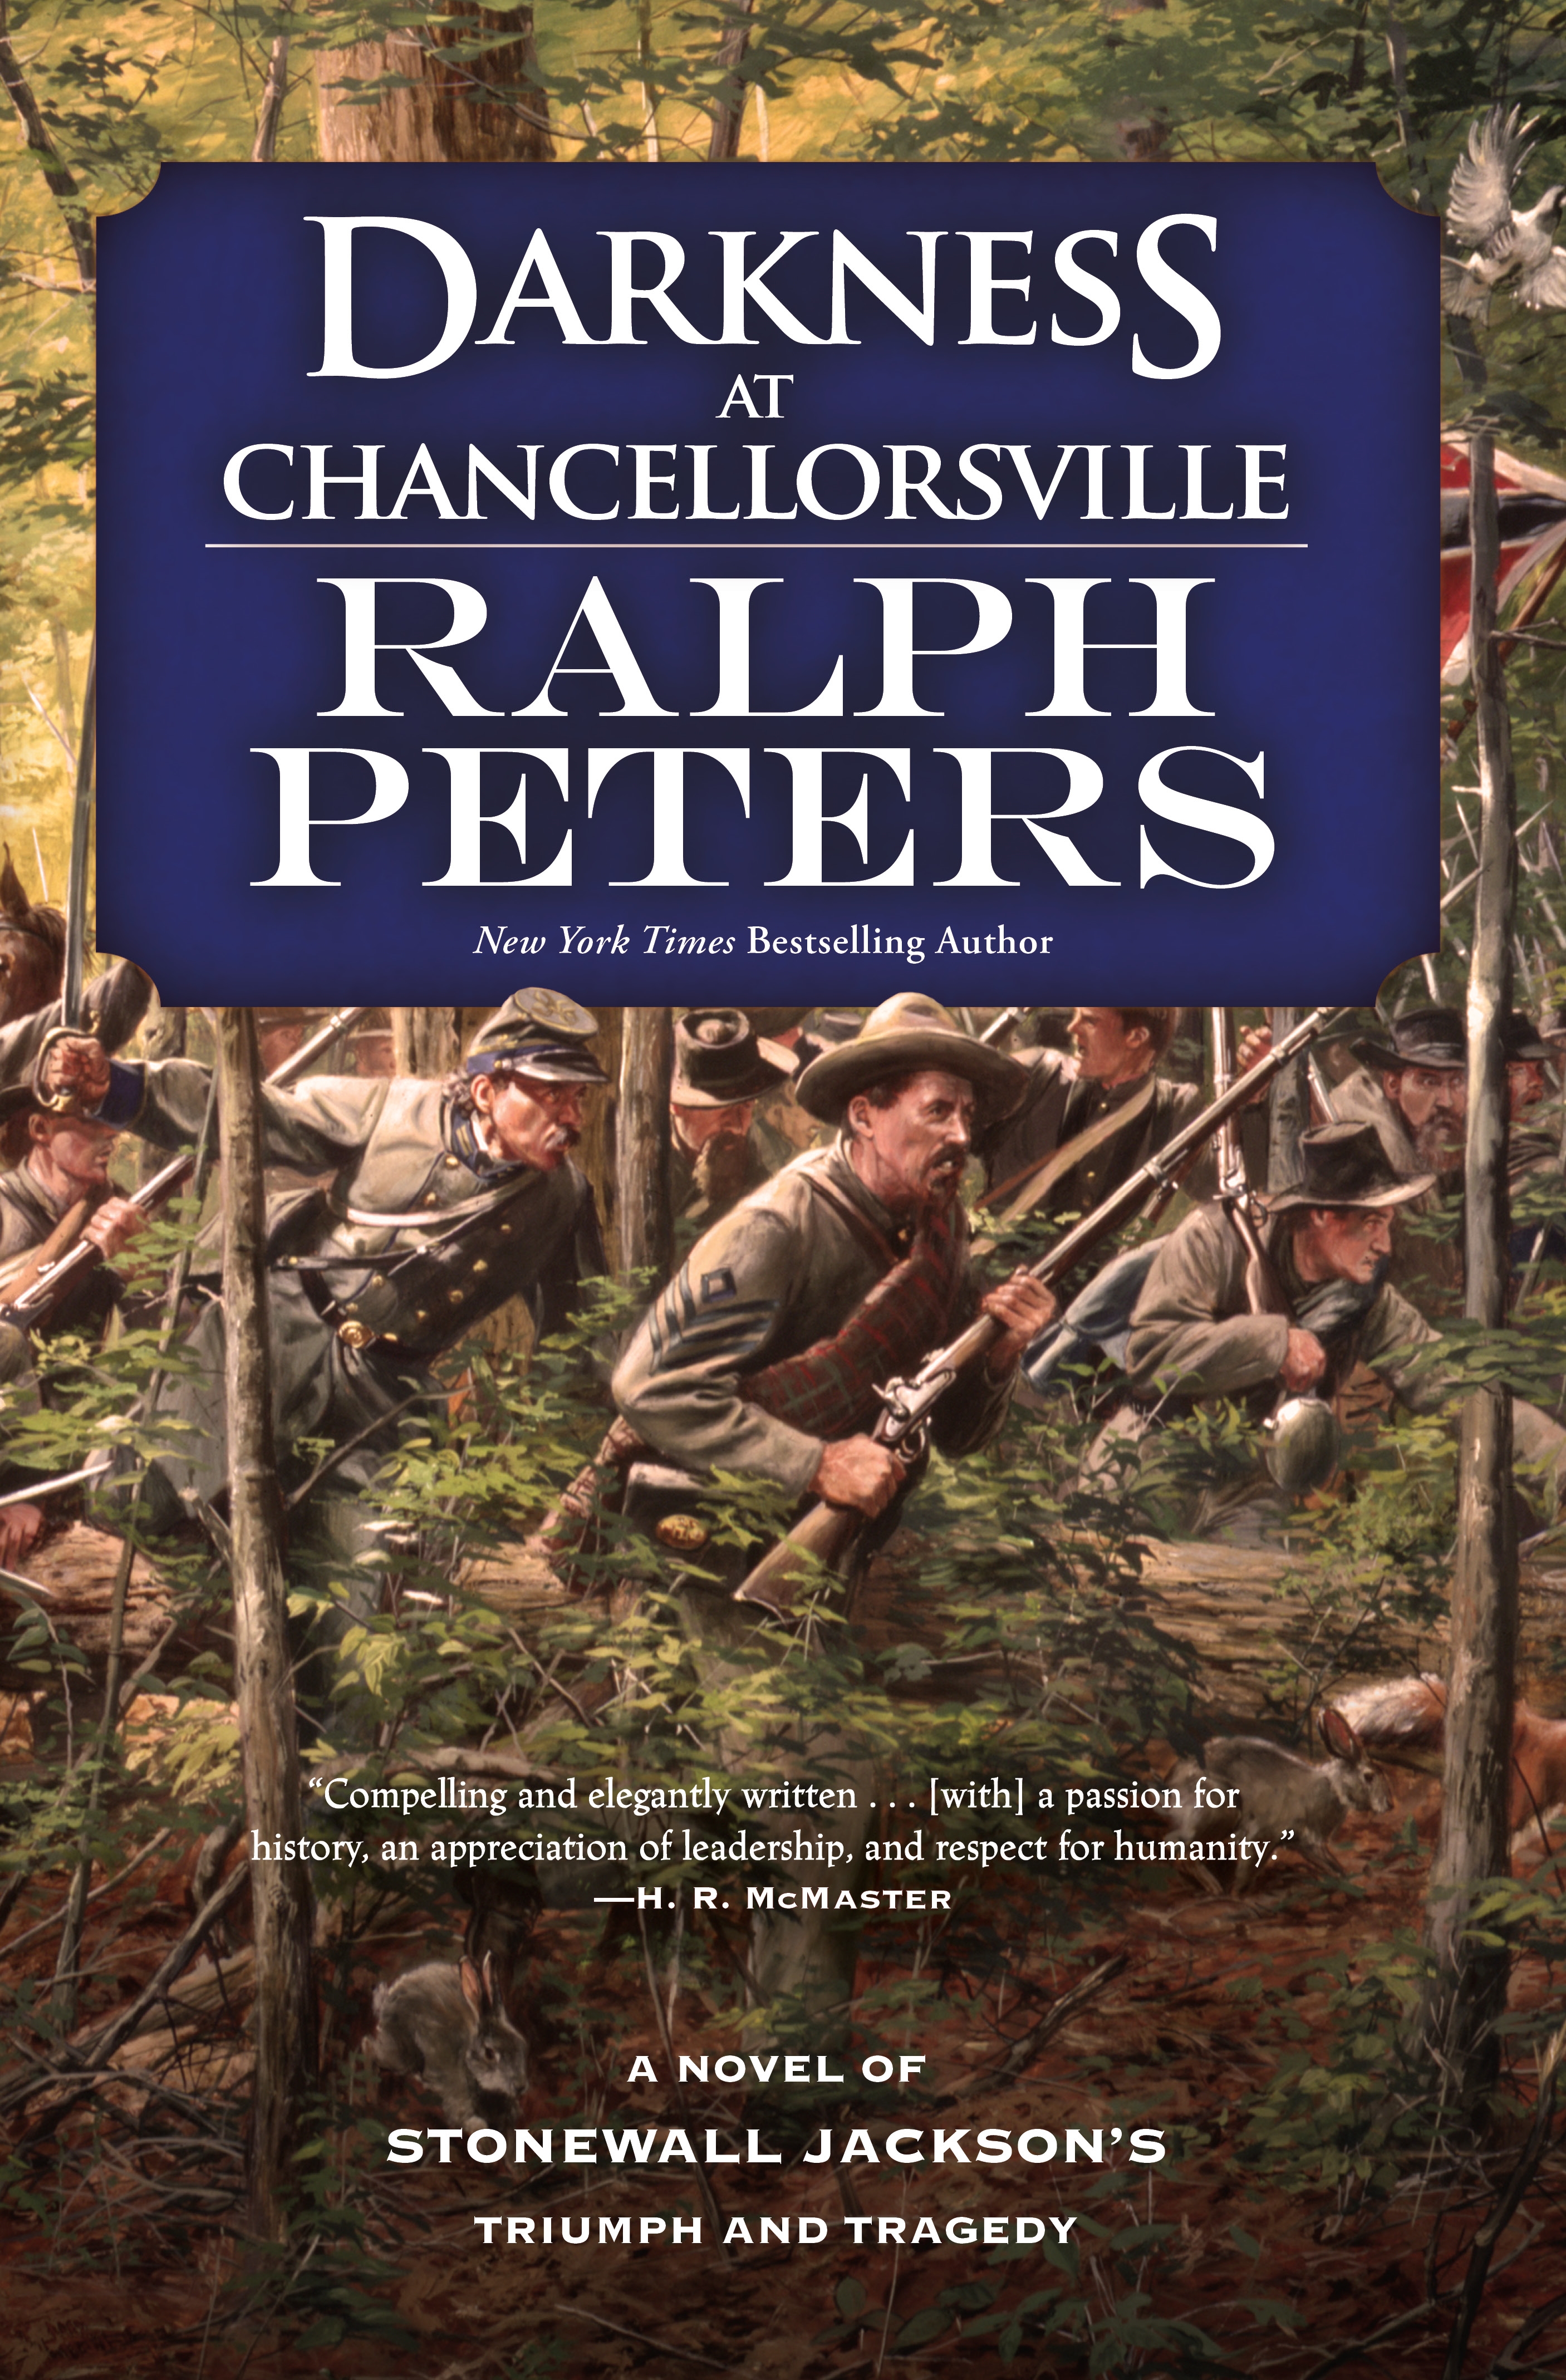 Darkness at Chancellorsville : A Novel of Stonewall Jackson's Triumph and Tragedy by Ralph Peters